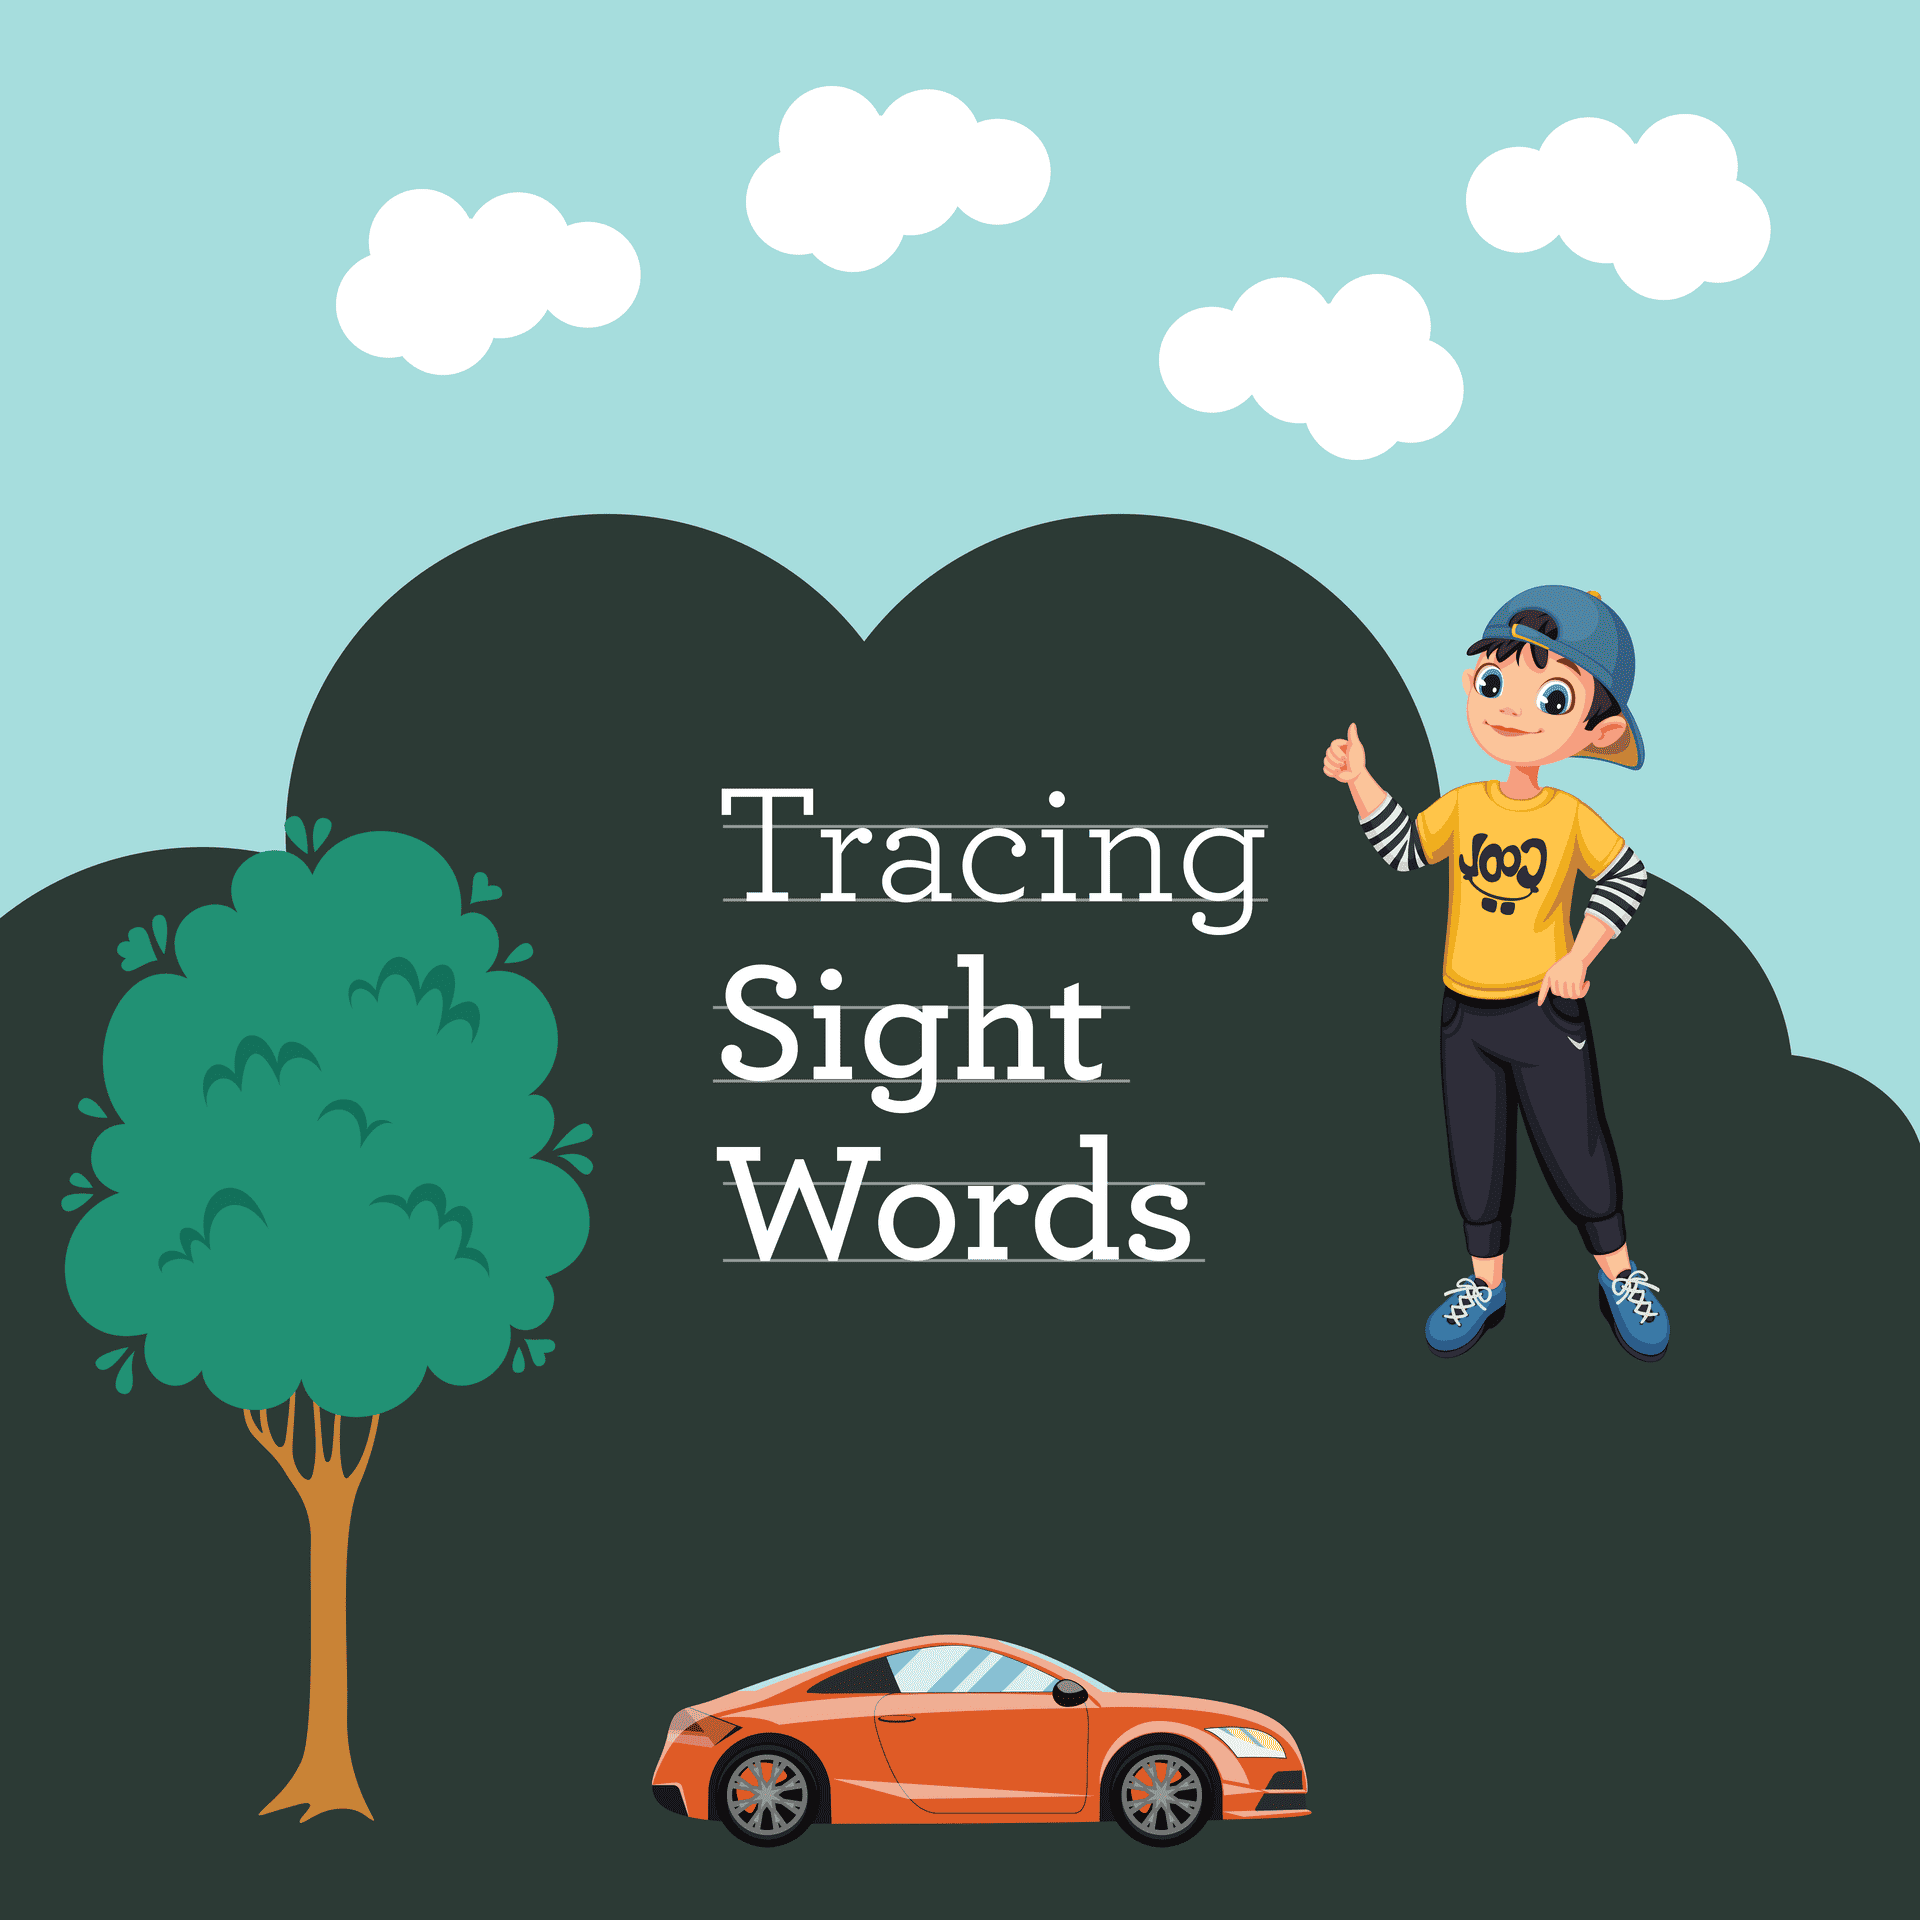  tracing sight words overview